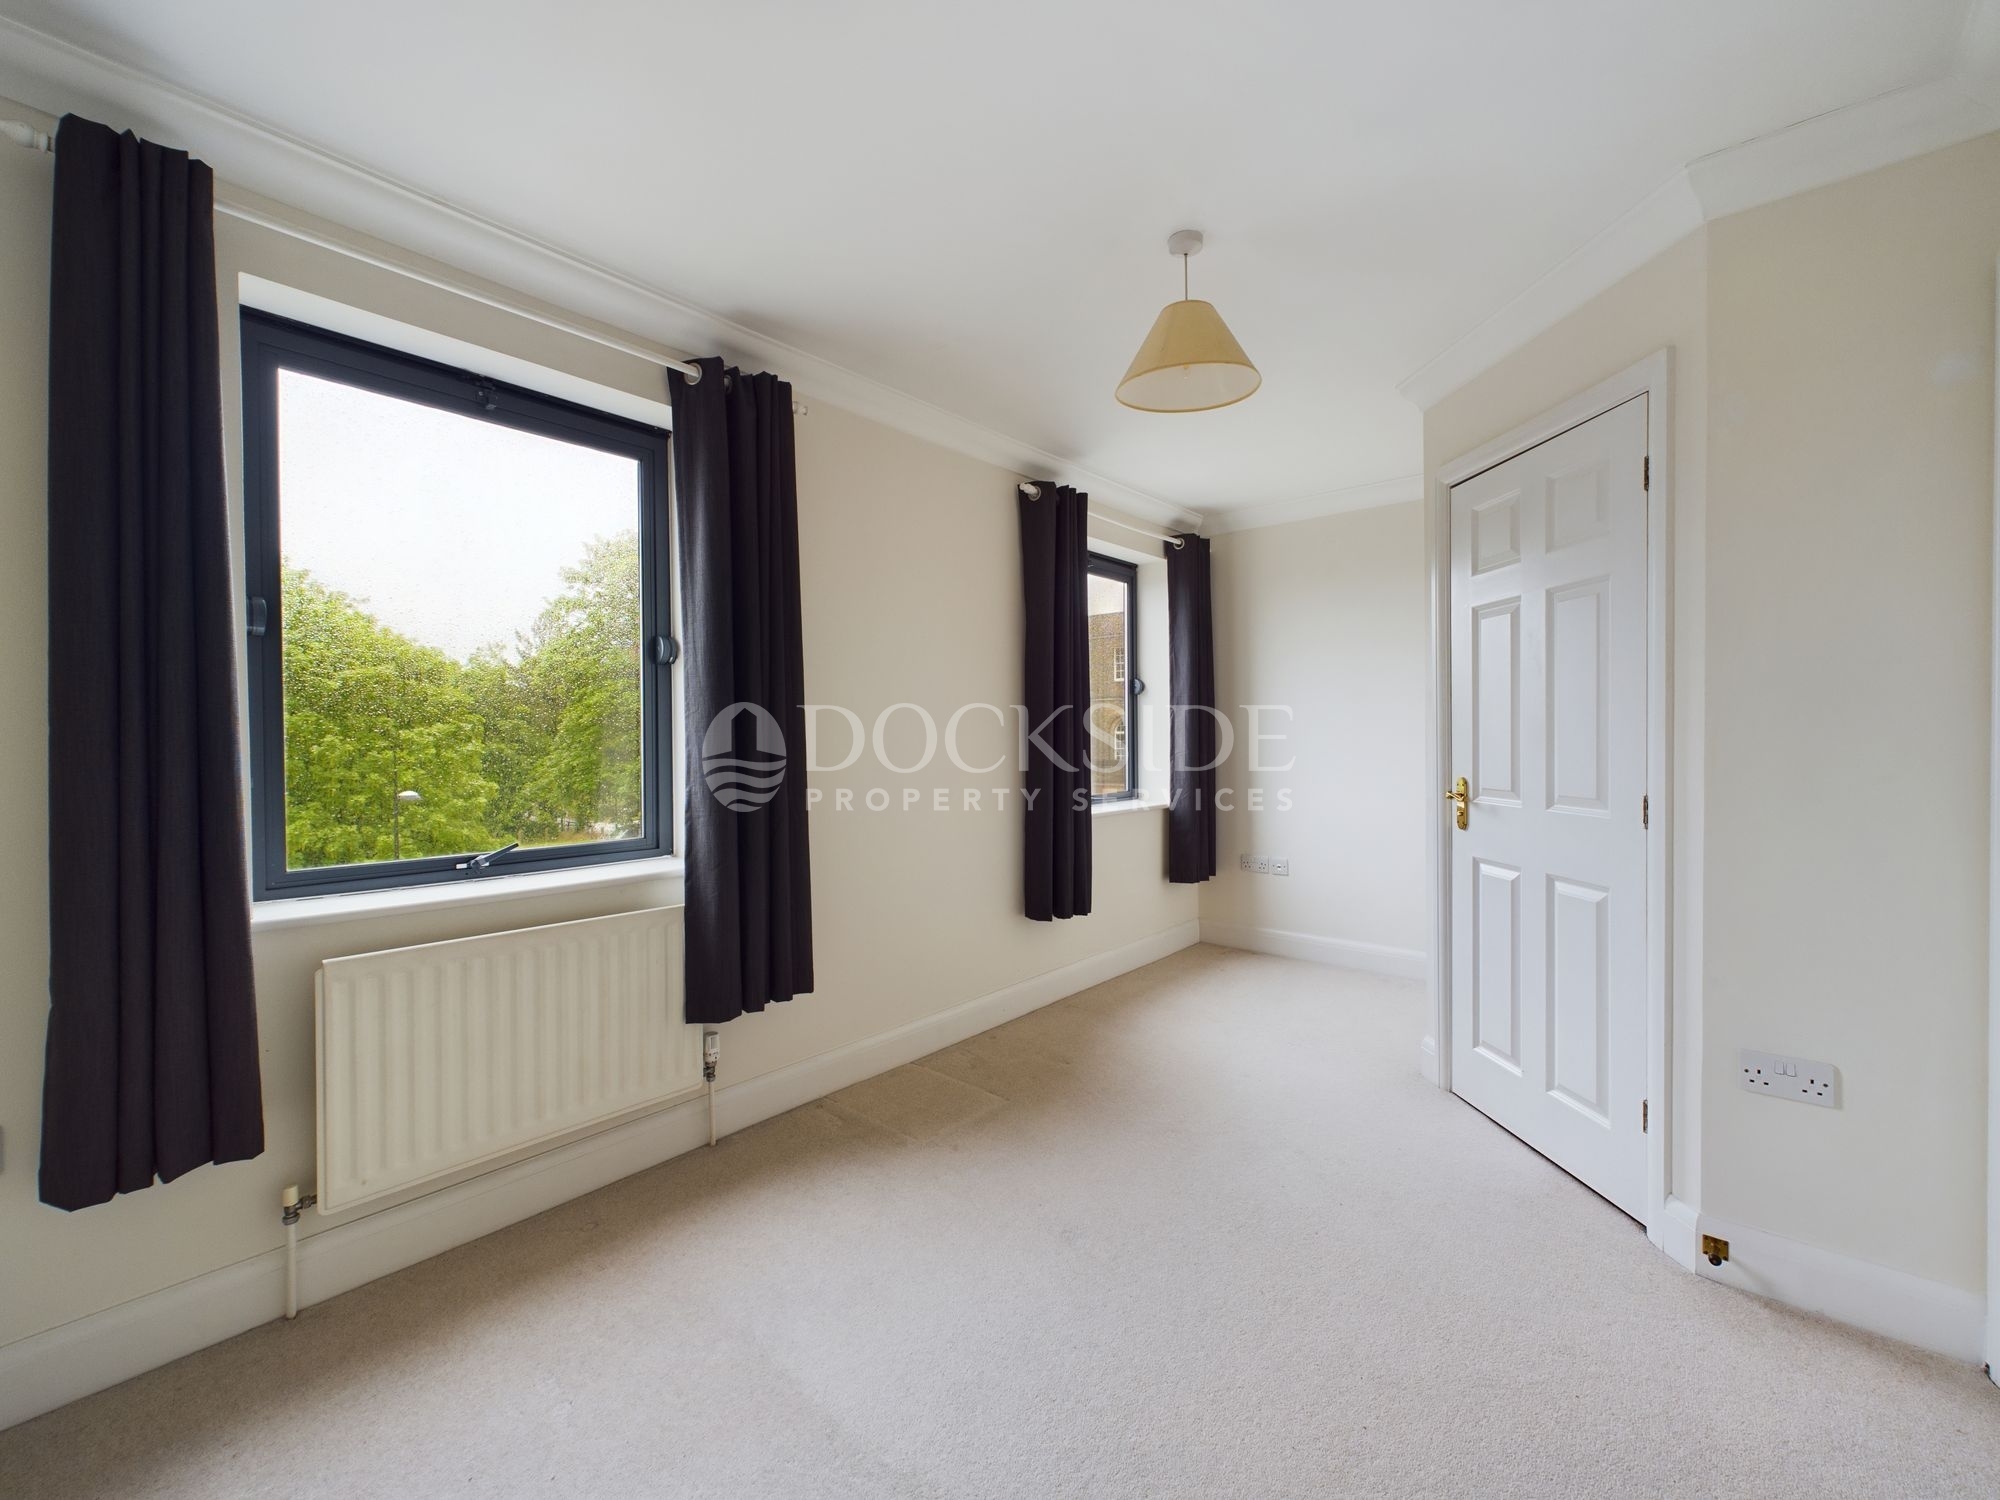 4 bed house to rent in Marc Brunel Way, Chatham  - Property Image 6